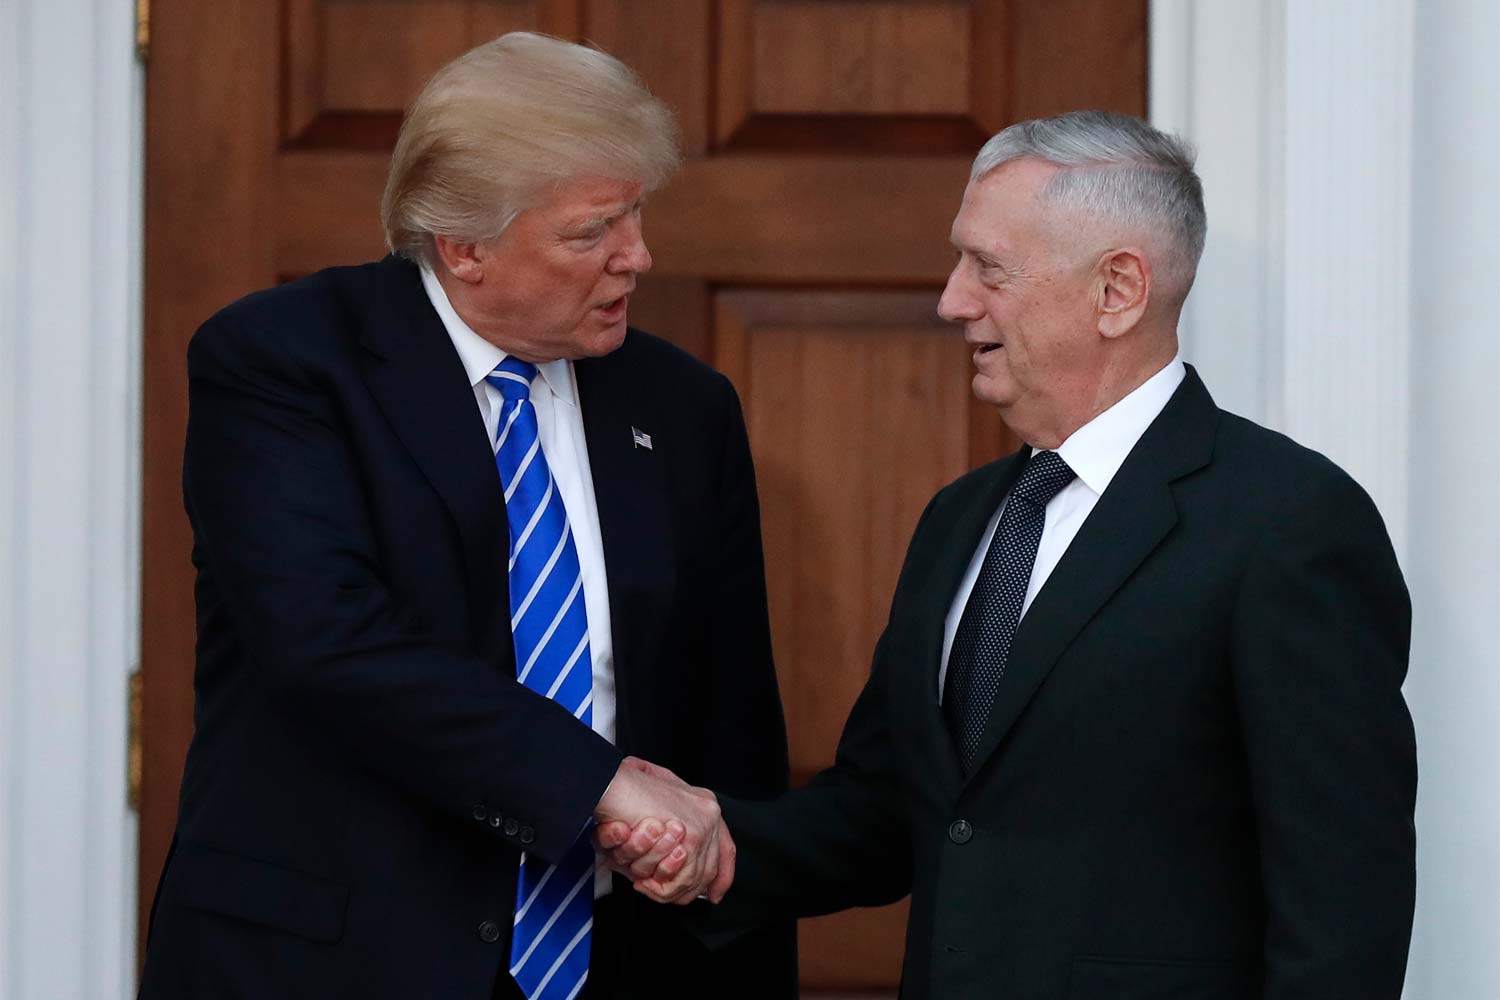 “Mad Dog” Mattis sends warning to North Korea that U.S. considers it a “clear and present danger” – is war on the horizon?